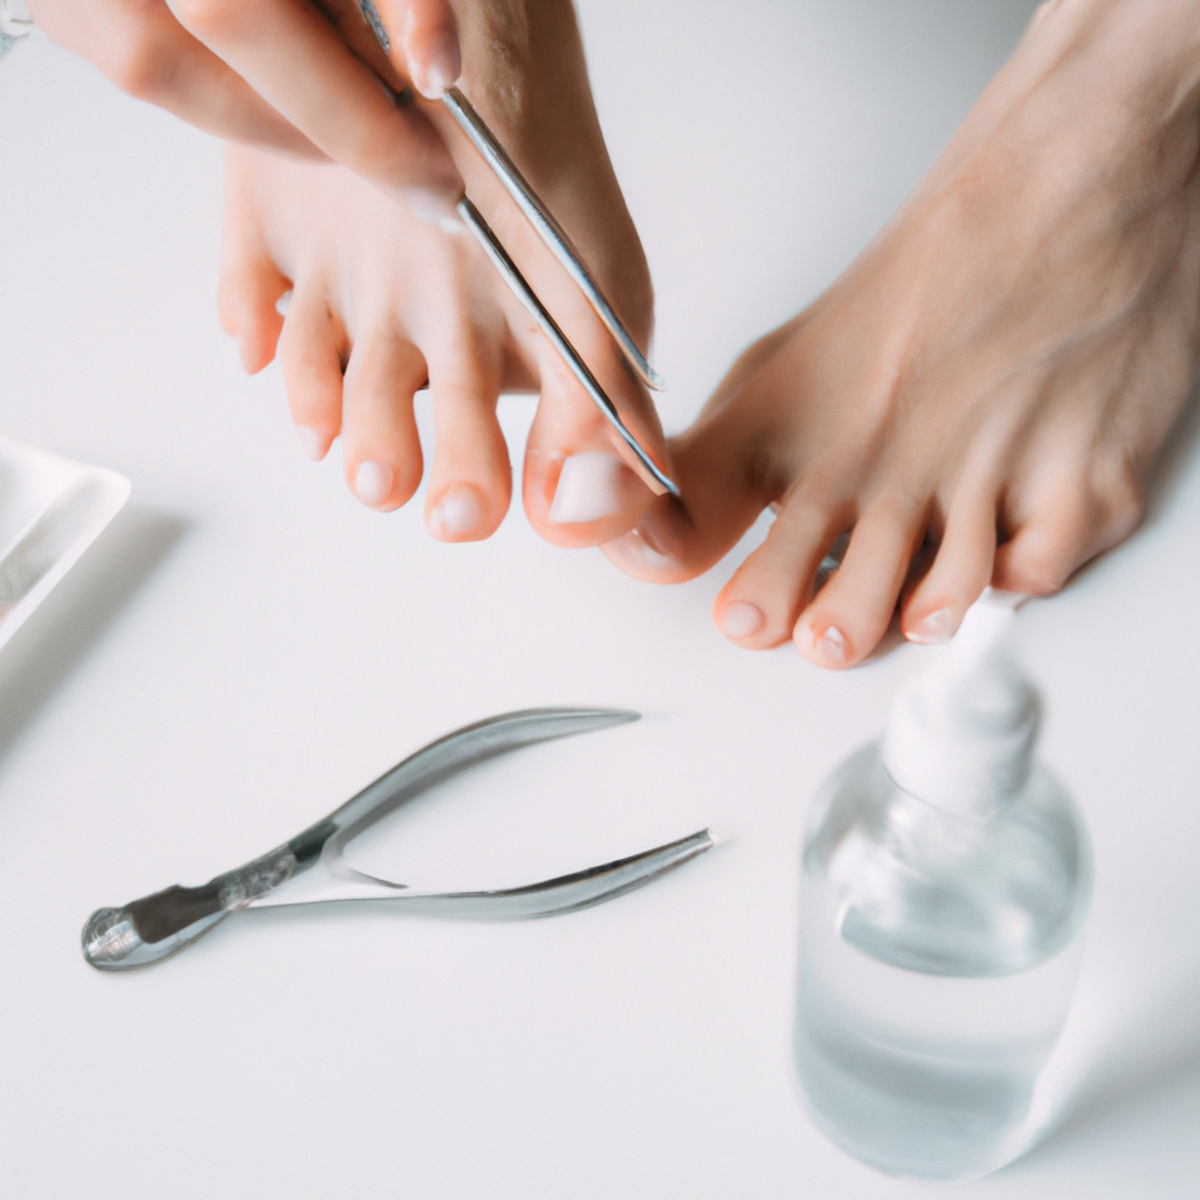 Close-up view of foot with tweezers, antiseptic, and magnifying glass, illustrating precise treatment of nail disorders.